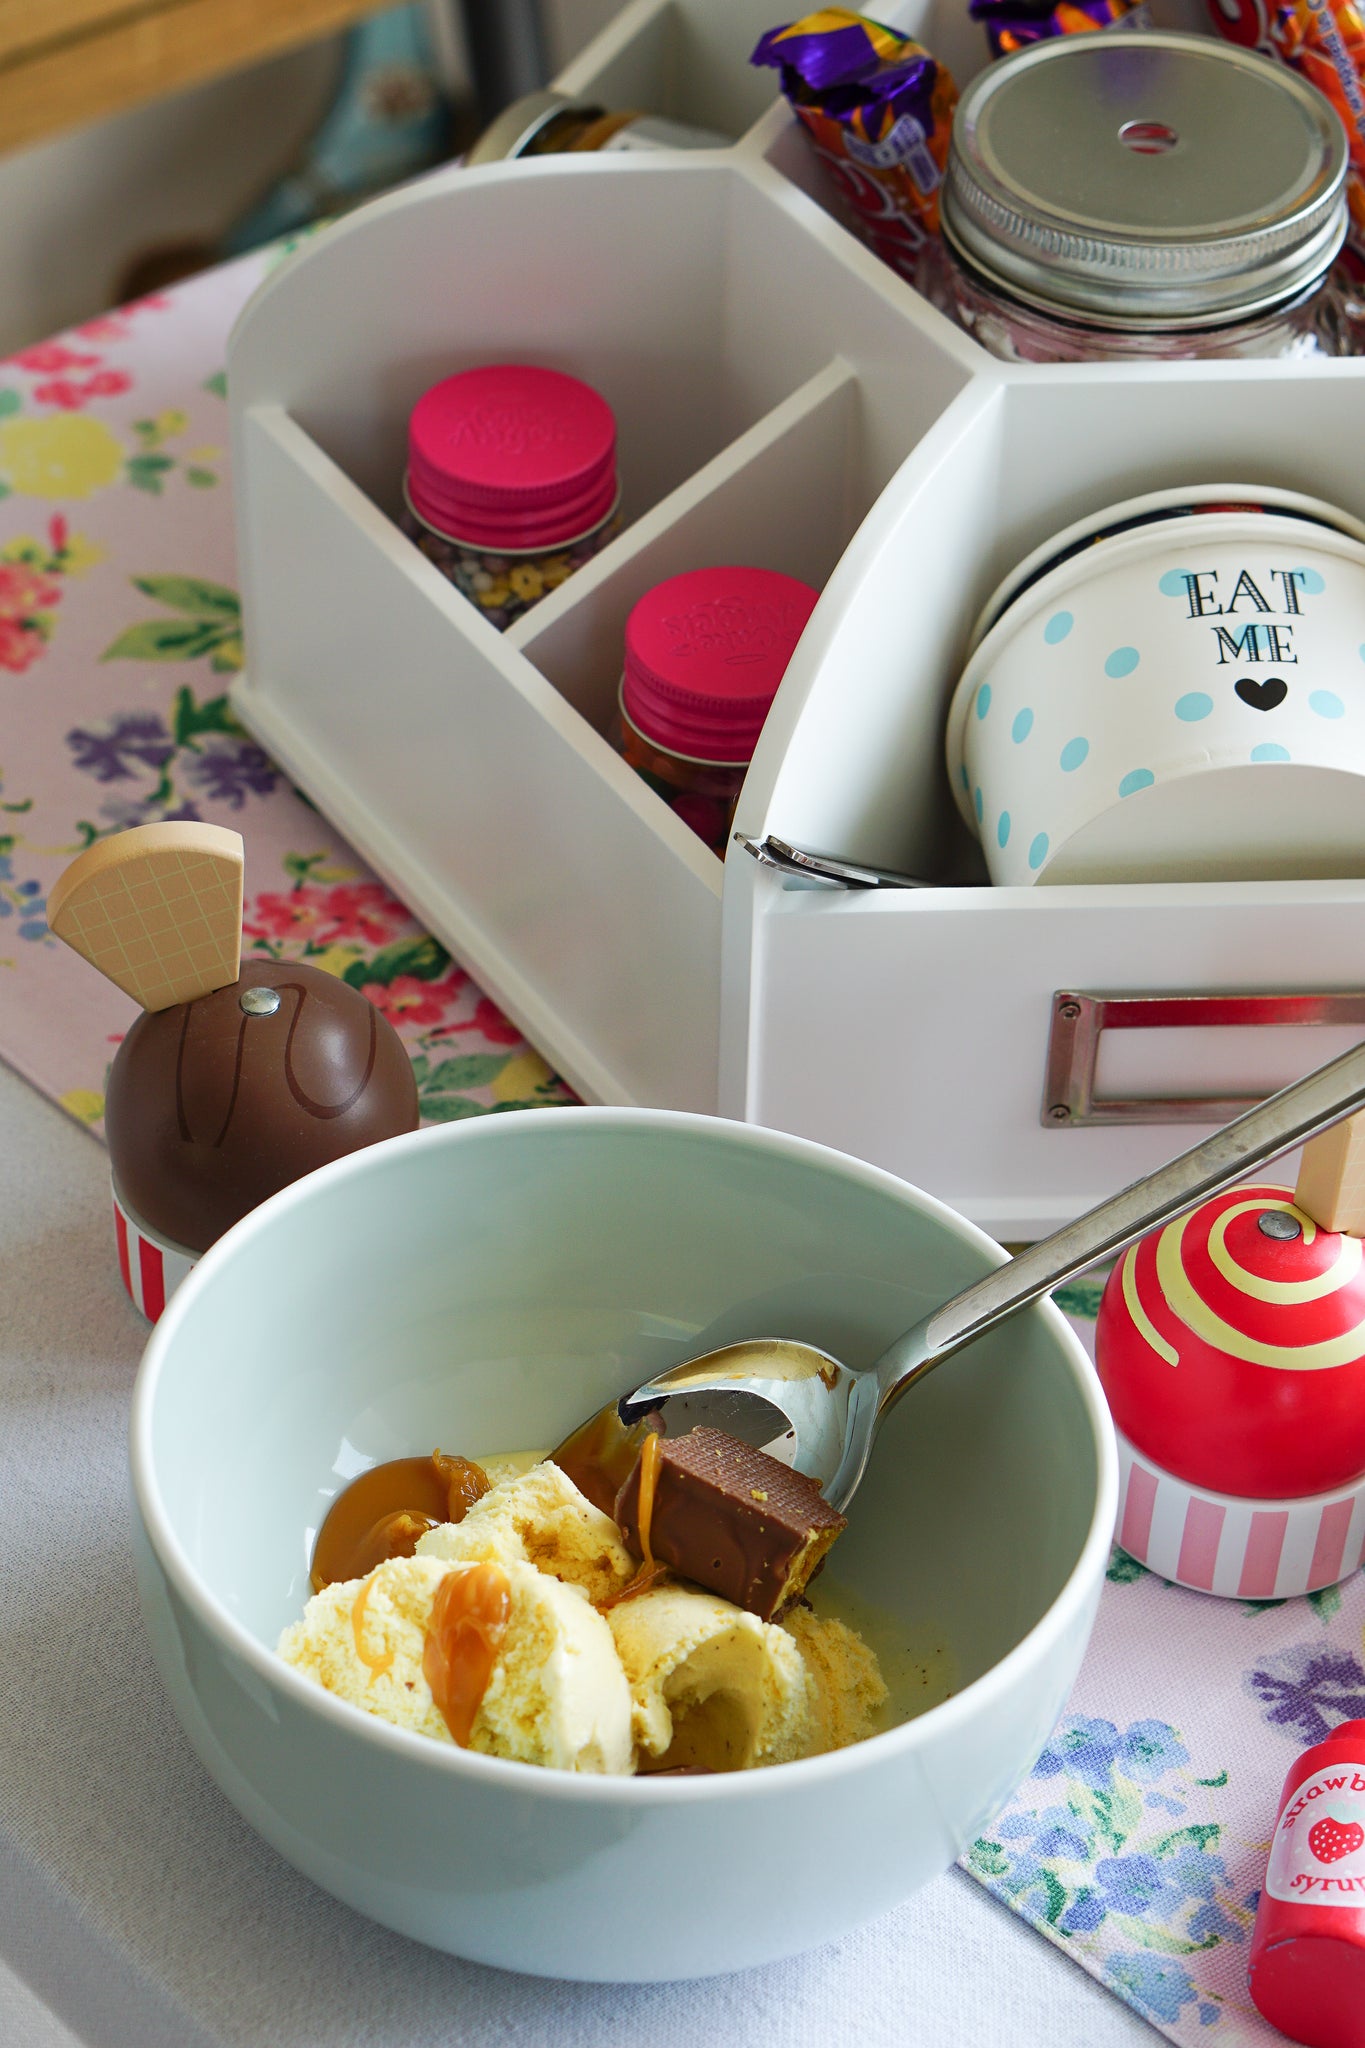 From role play to real life ... create your own ice cream toppings bar